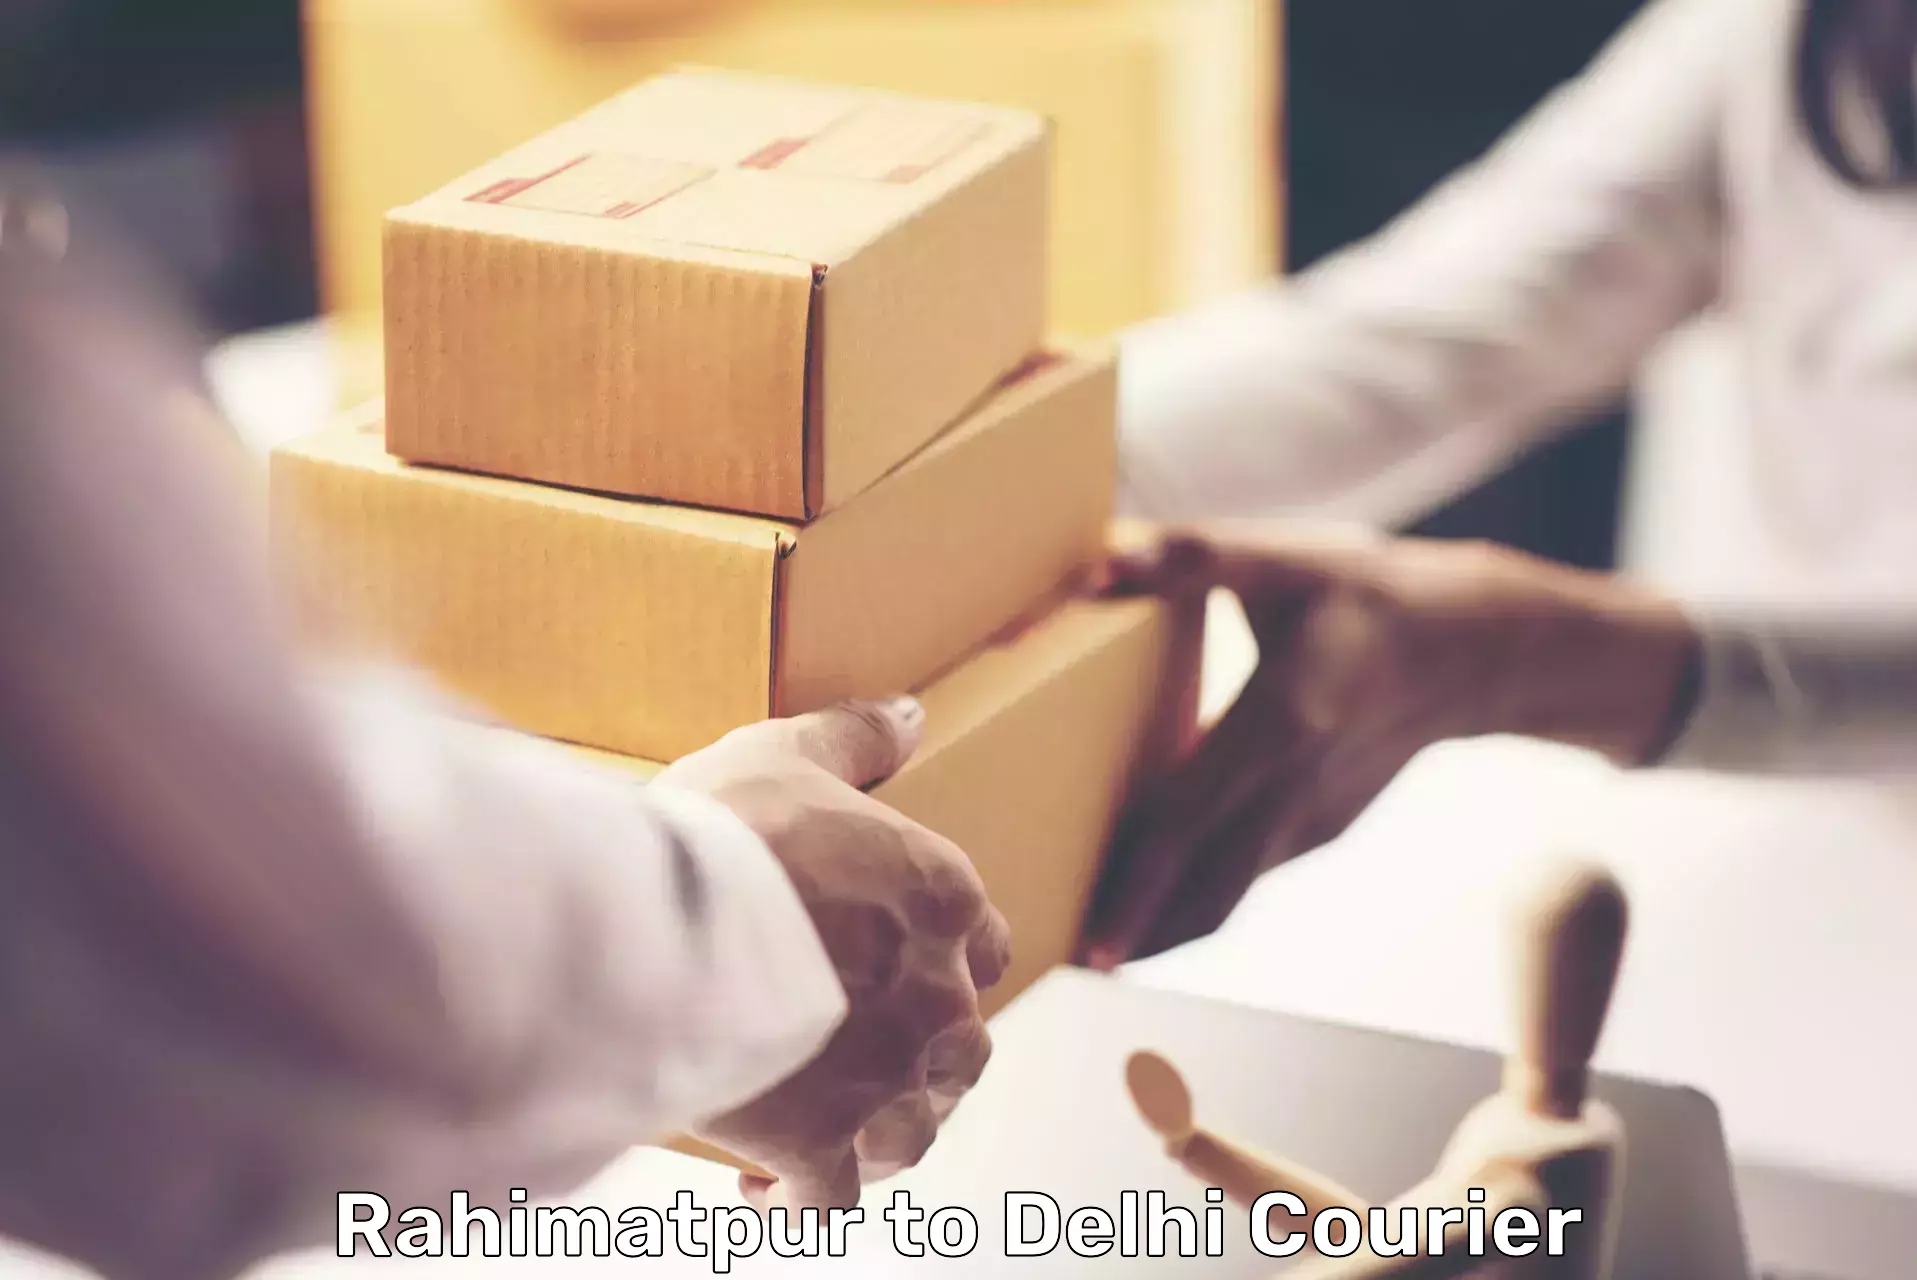 High-quality delivery services Rahimatpur to East Delhi